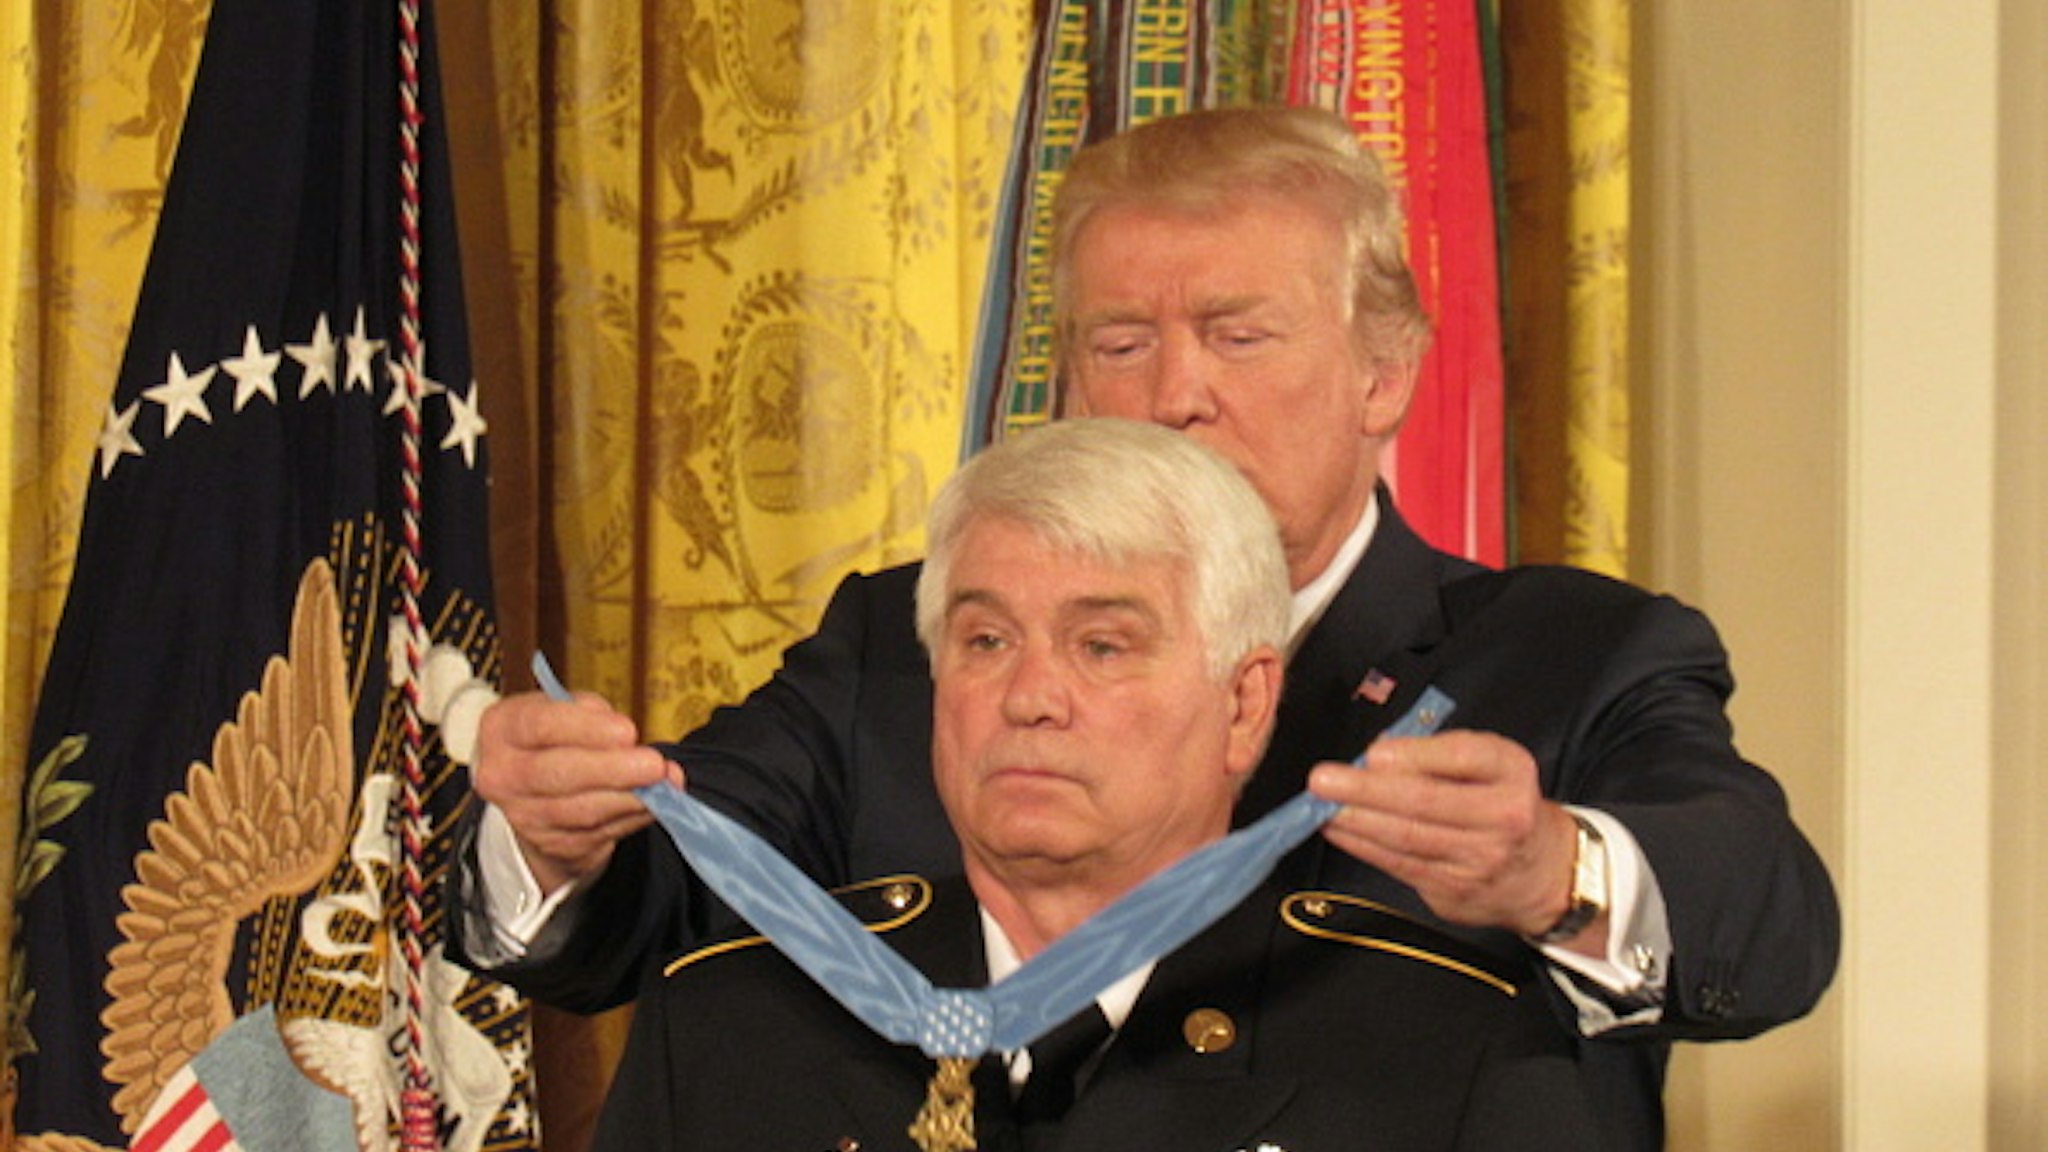 U.S. President Donald Trump presents the Medal of Honor to former Army Specialist James McCloughan (L) of South Haven, Michigan, during an East Room ceremony at the White House July 31, 2017 in Washington, DC. McCloughan is awarded with the medal for his heroic acts as a combat medic during the Vietnam War. .